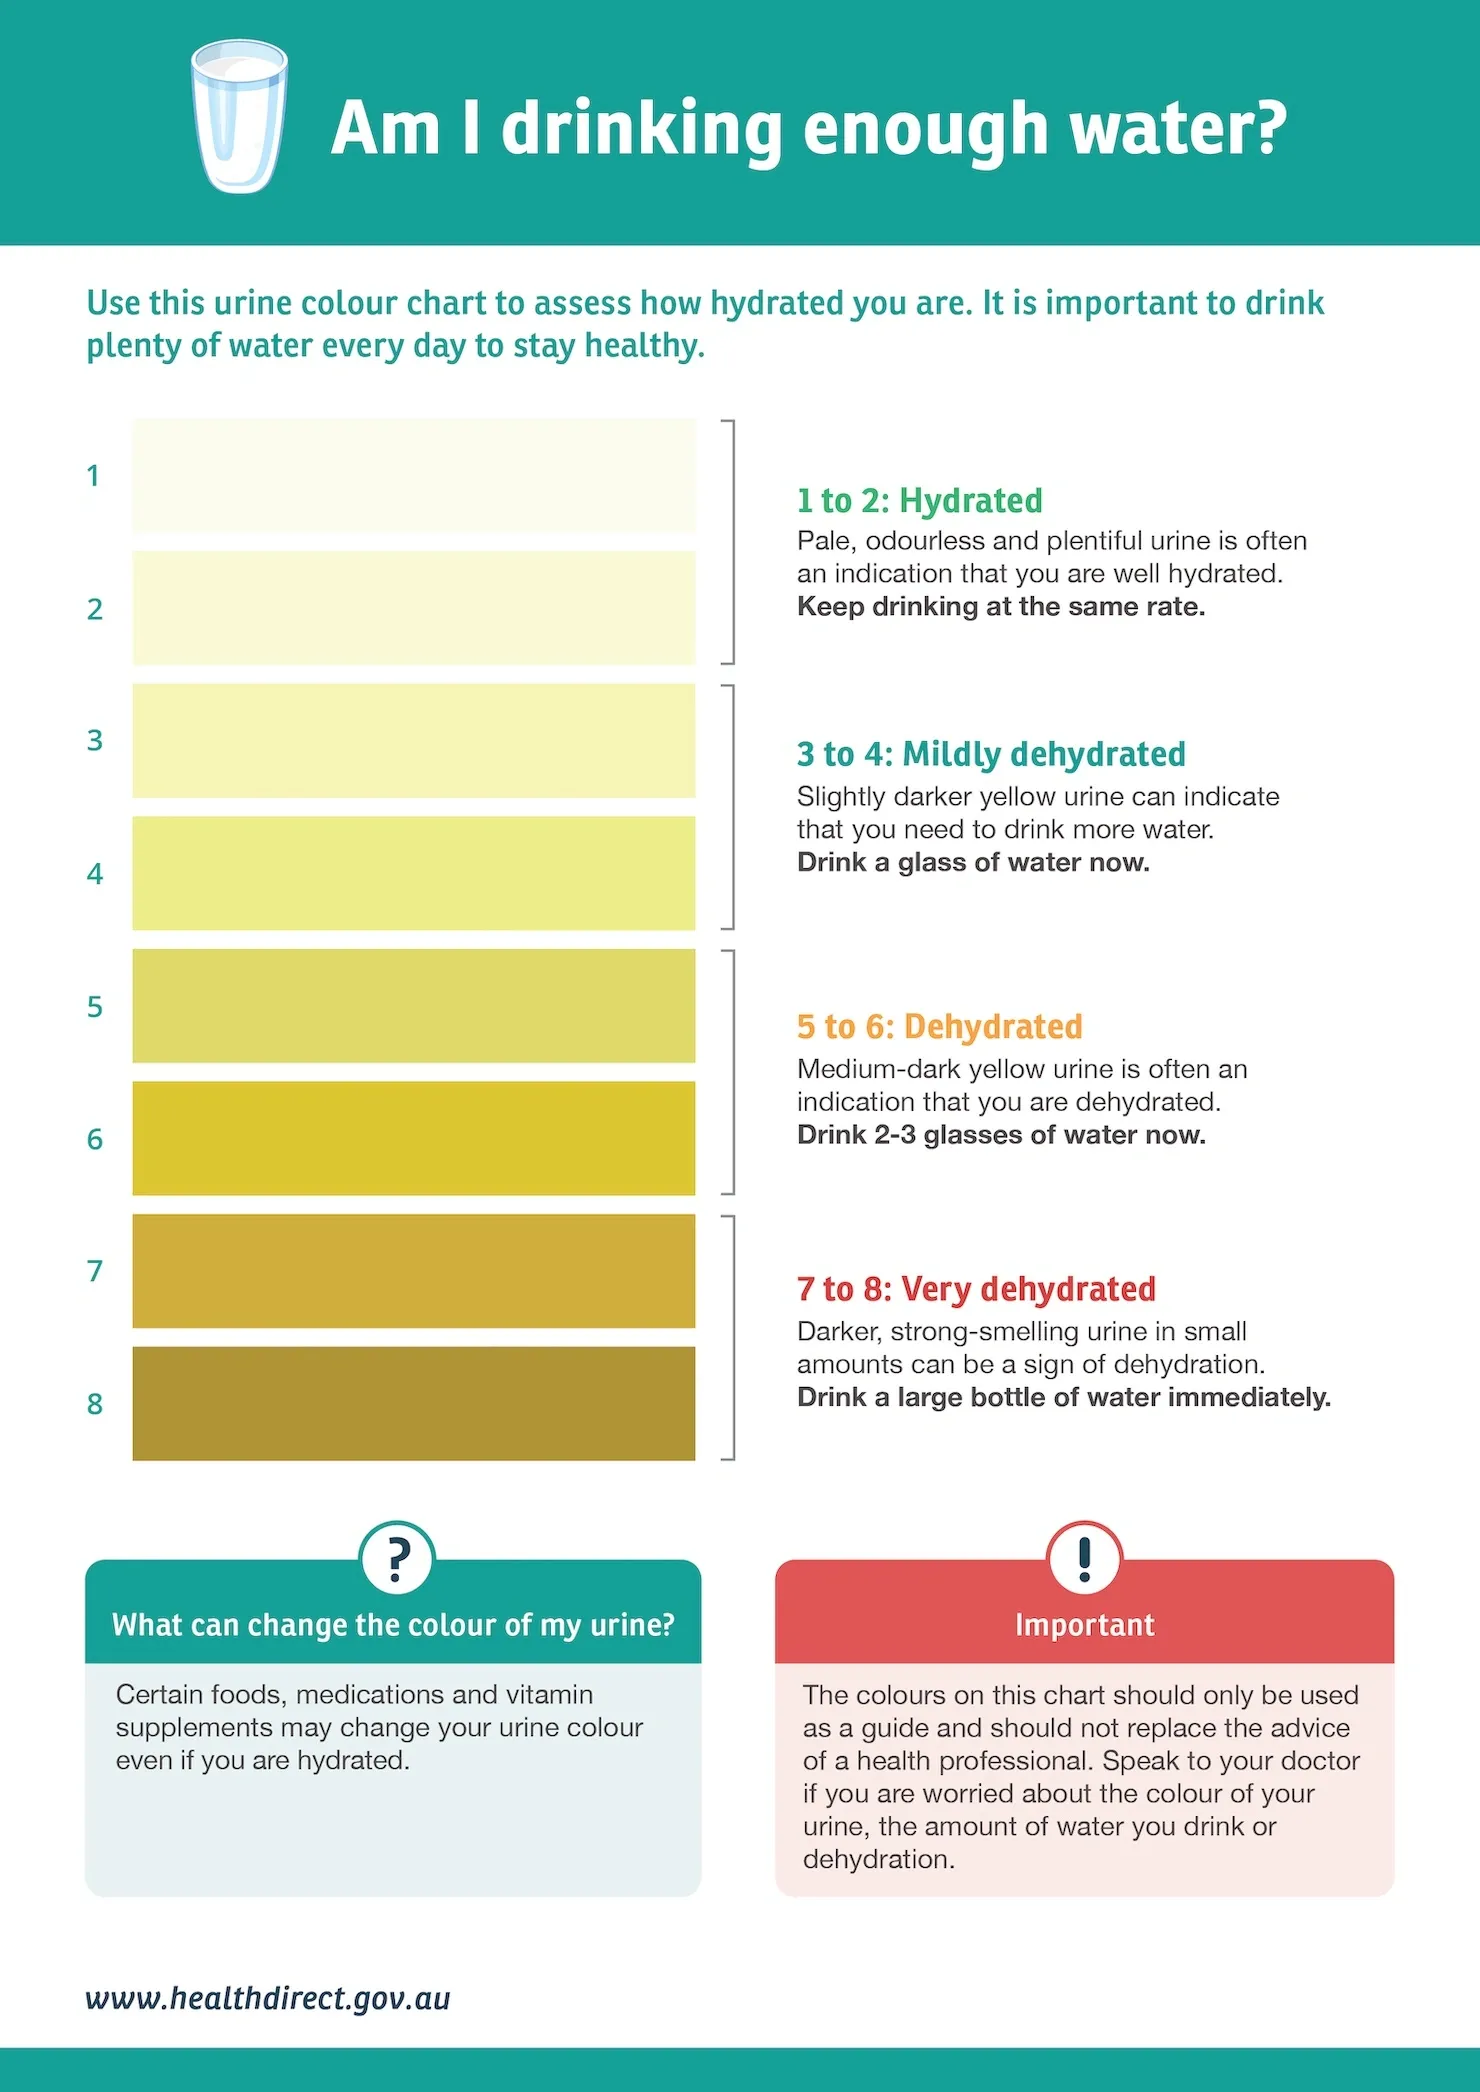 Dehydration chart by the color of the urine